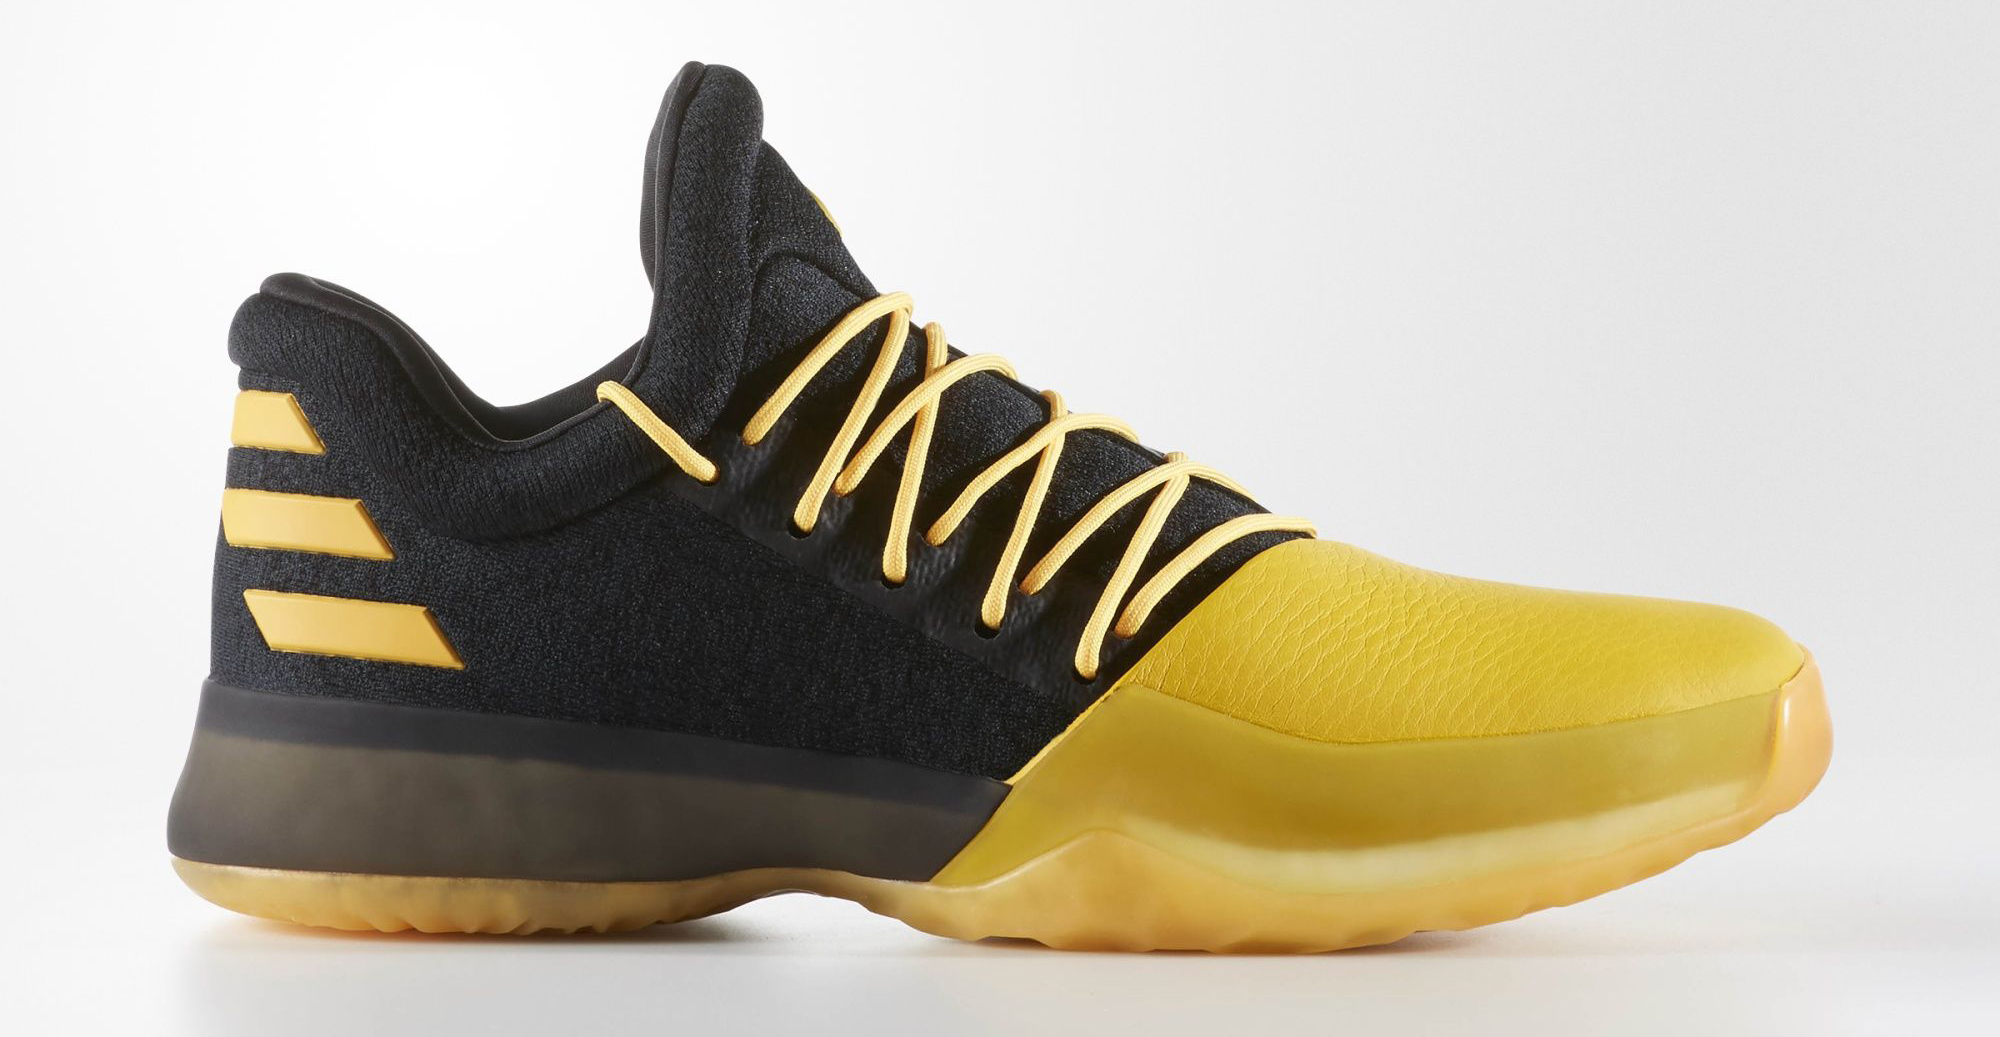 The adidas Harden Vol. 1 will Come in 